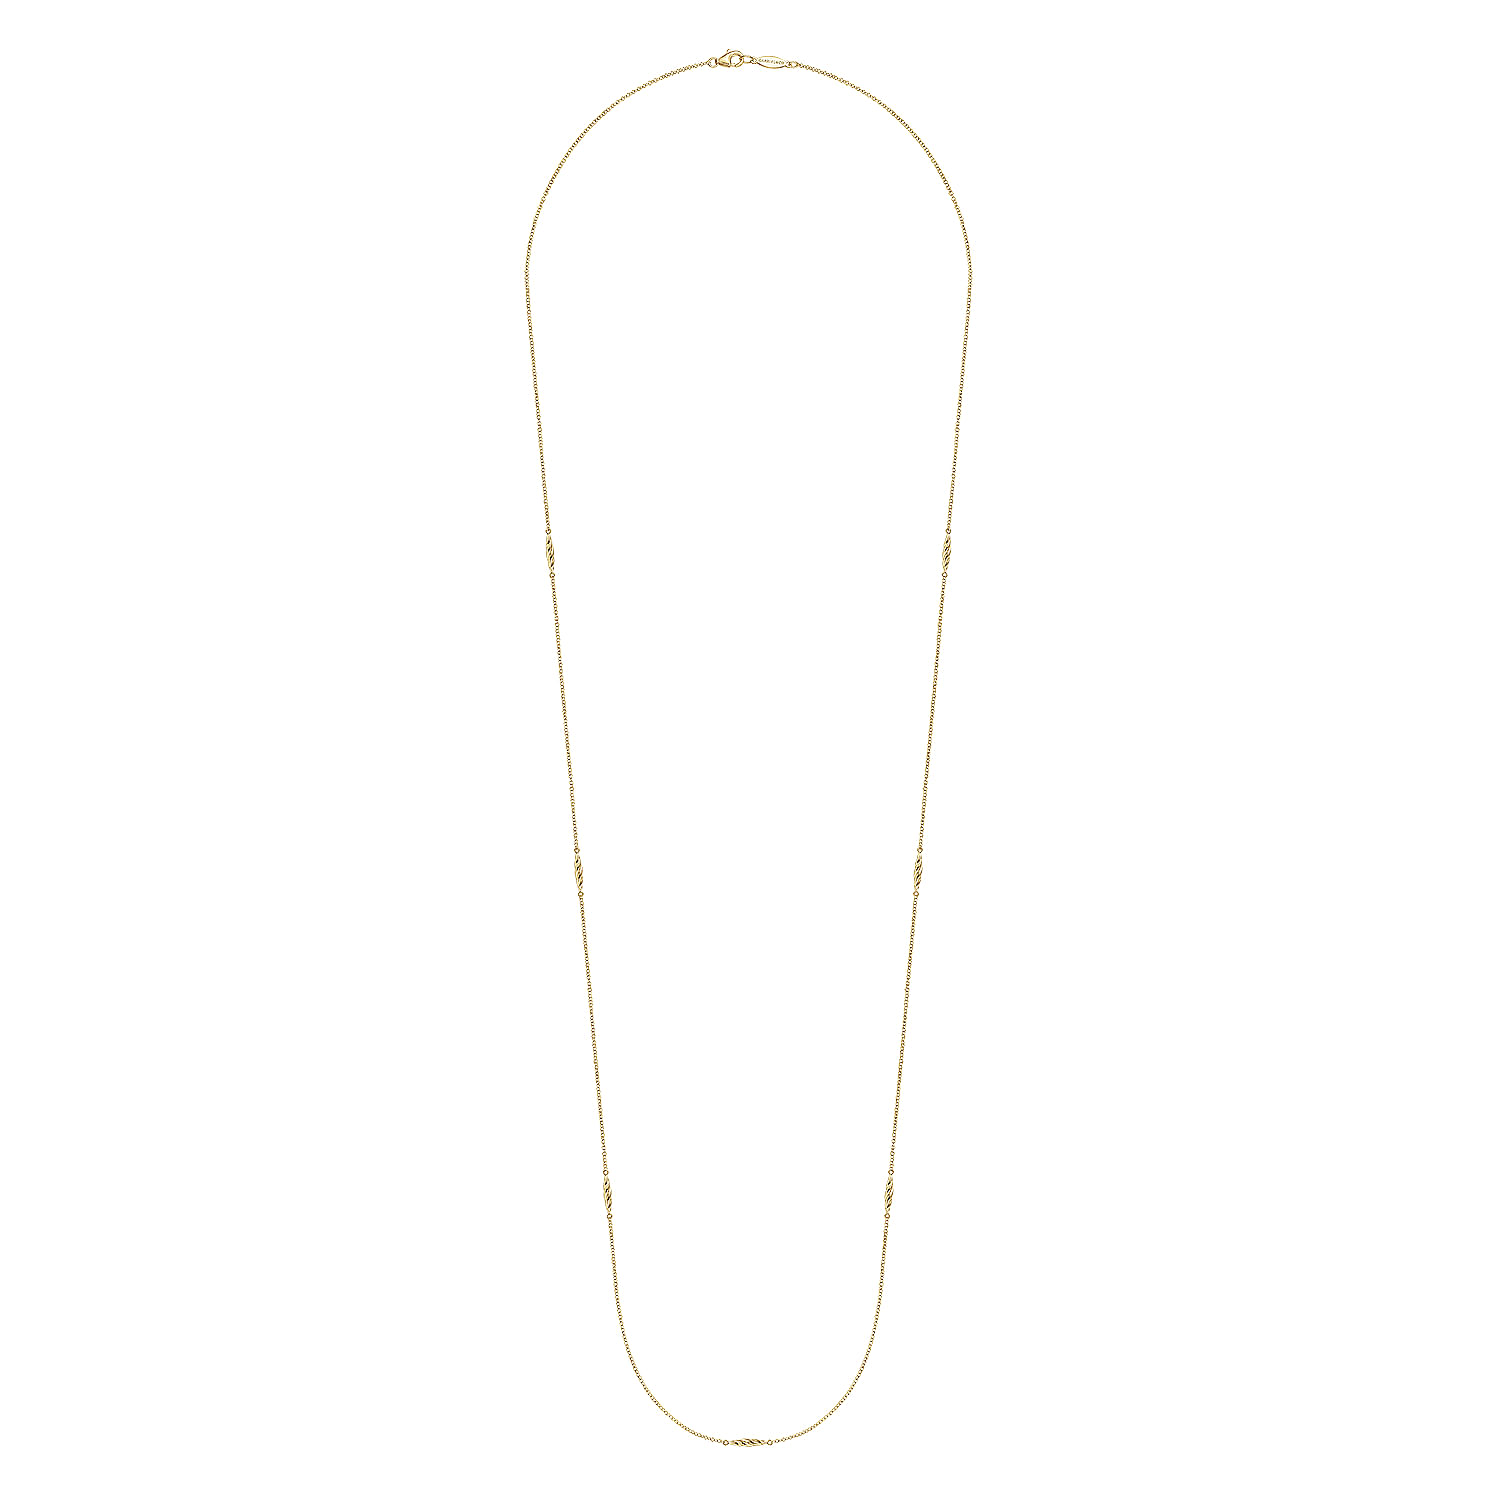 32 inch 14K Yellow Gold Chain Necklace with Twisted Tube Stations